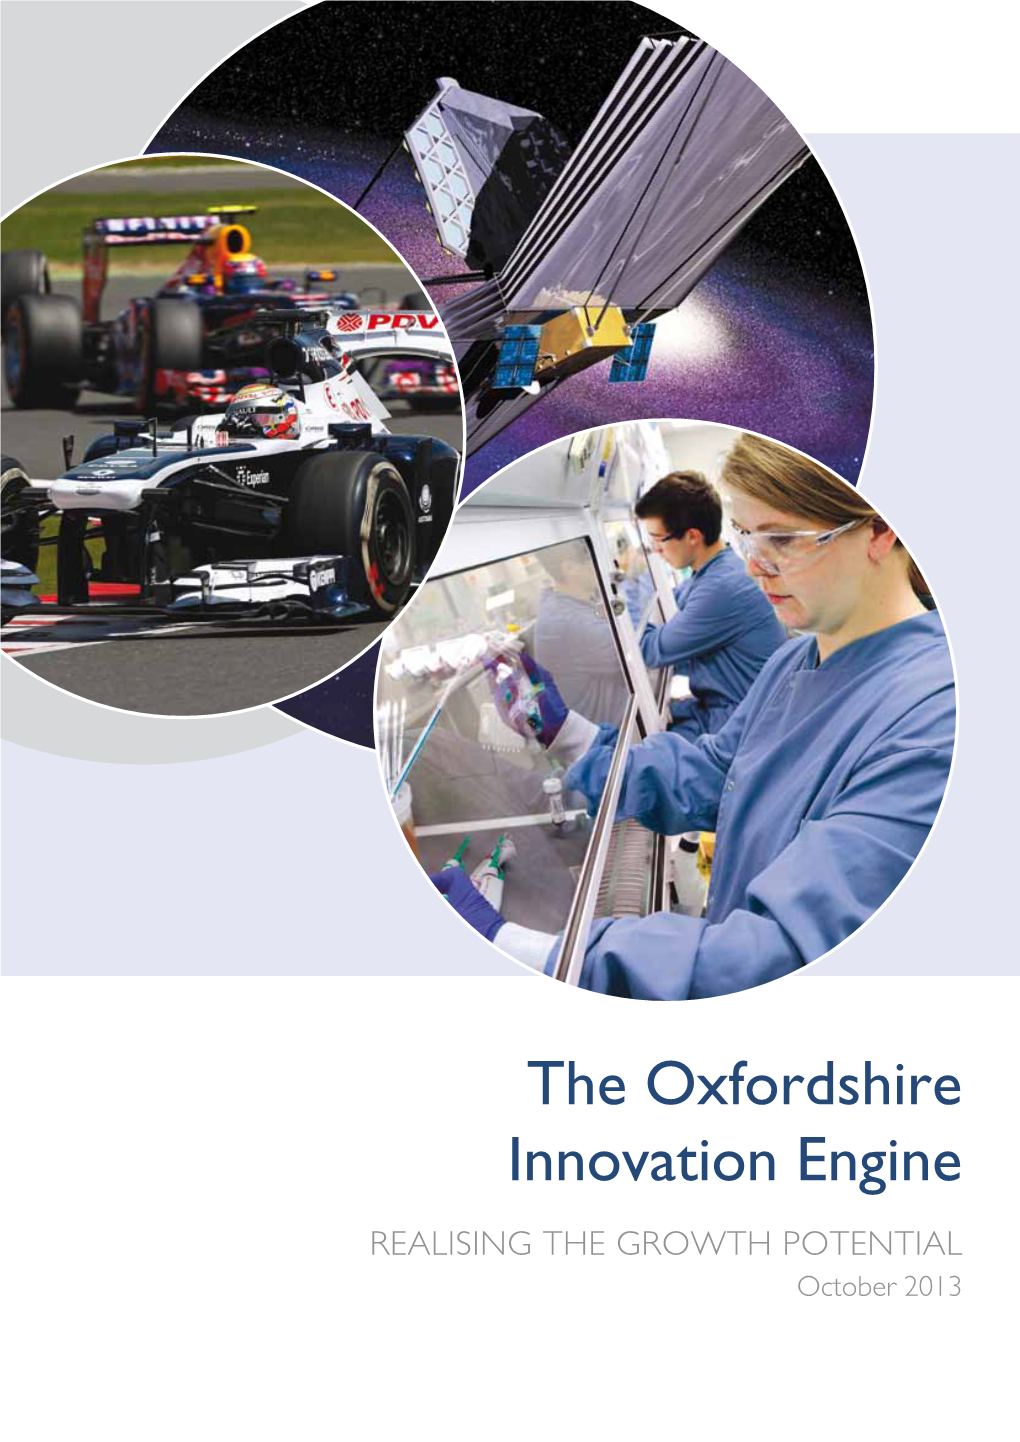 The Oxfordshire Innovation Engine Realising the Growth Potential October 2013 FRONT COVER IMAGES: 1